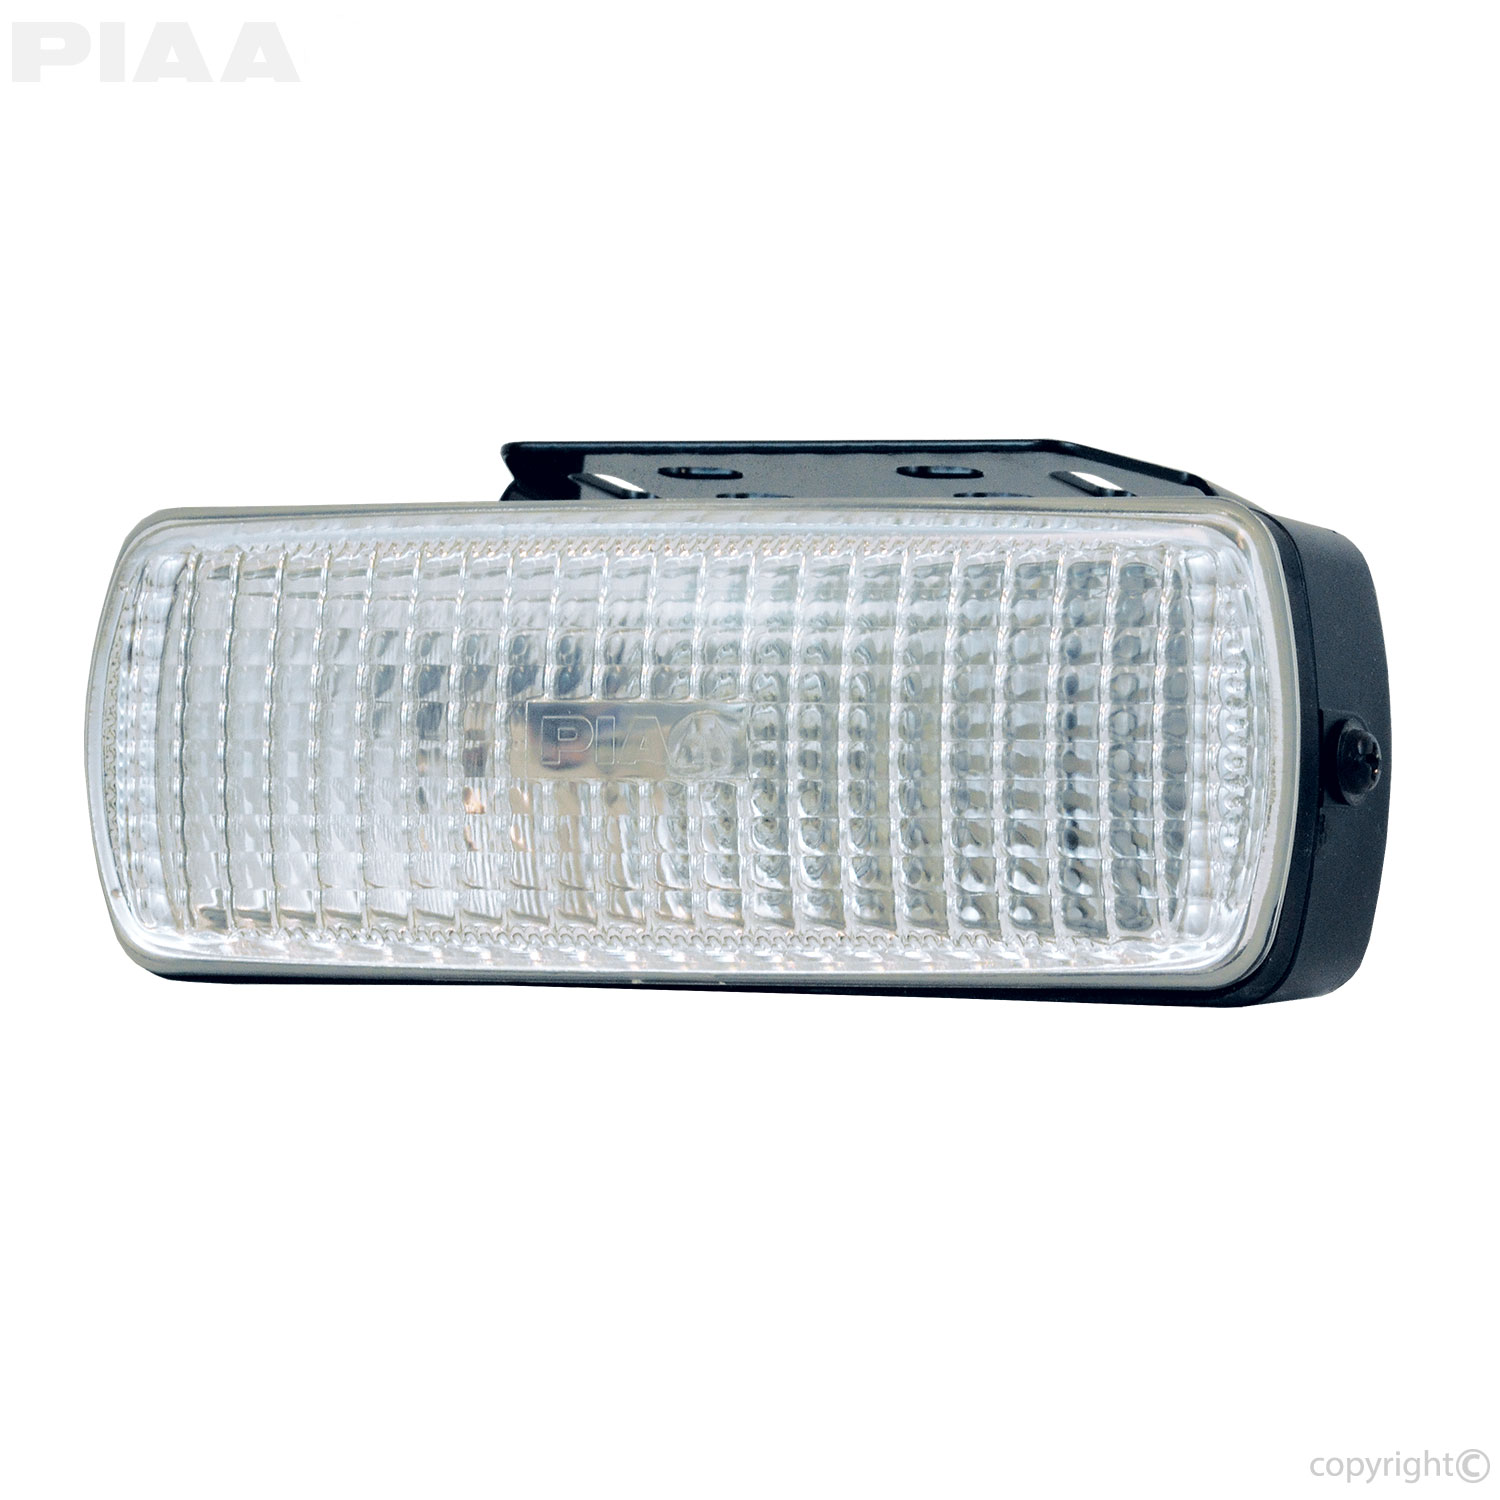 Piaa 1520 Clear Flood Back Up Lamp 